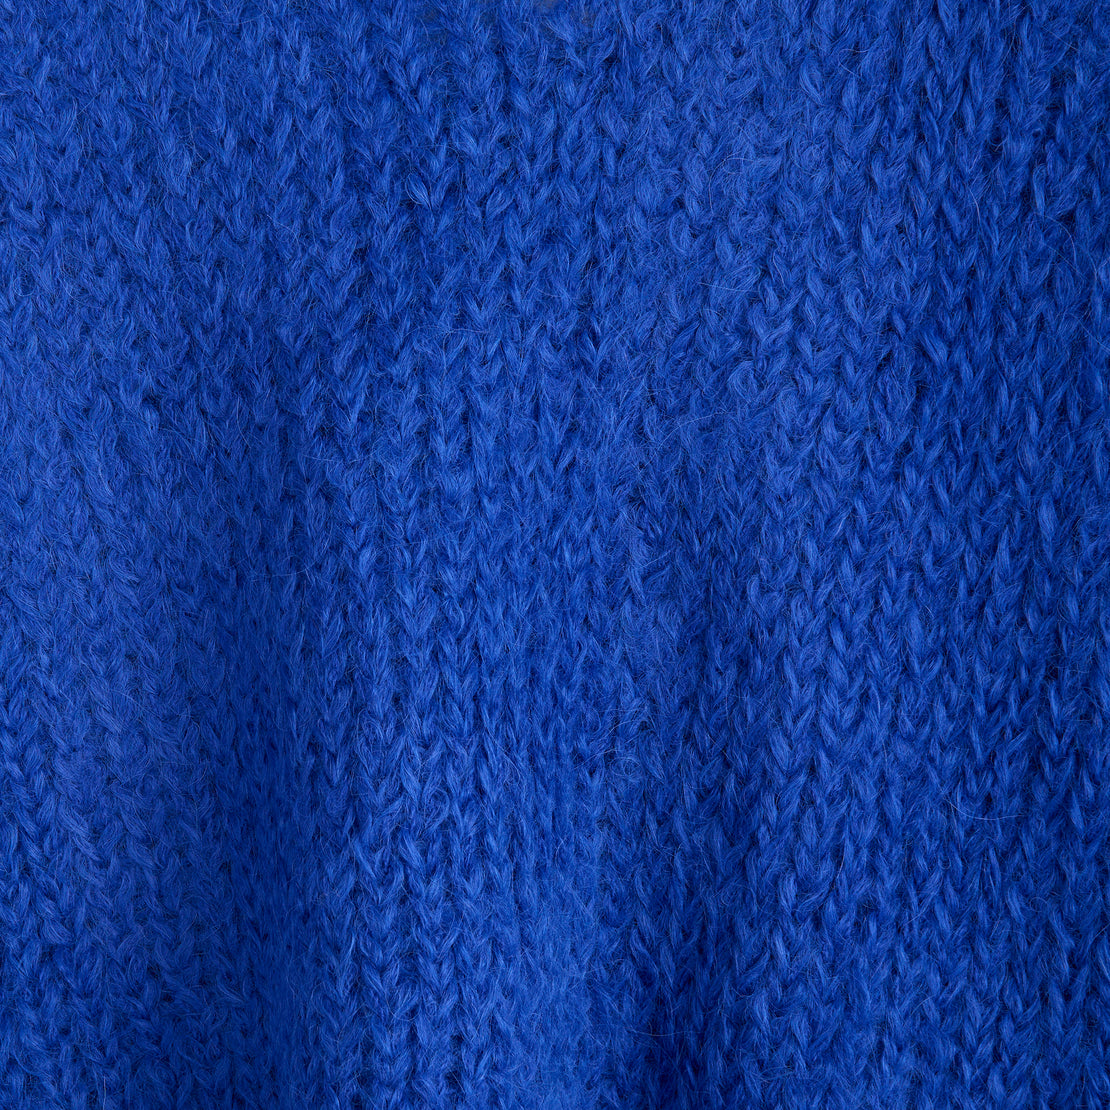 Sweater Tank - Royal Blue - Atelier Delphine - STAG Provisions - W - Tops - Sleeveless